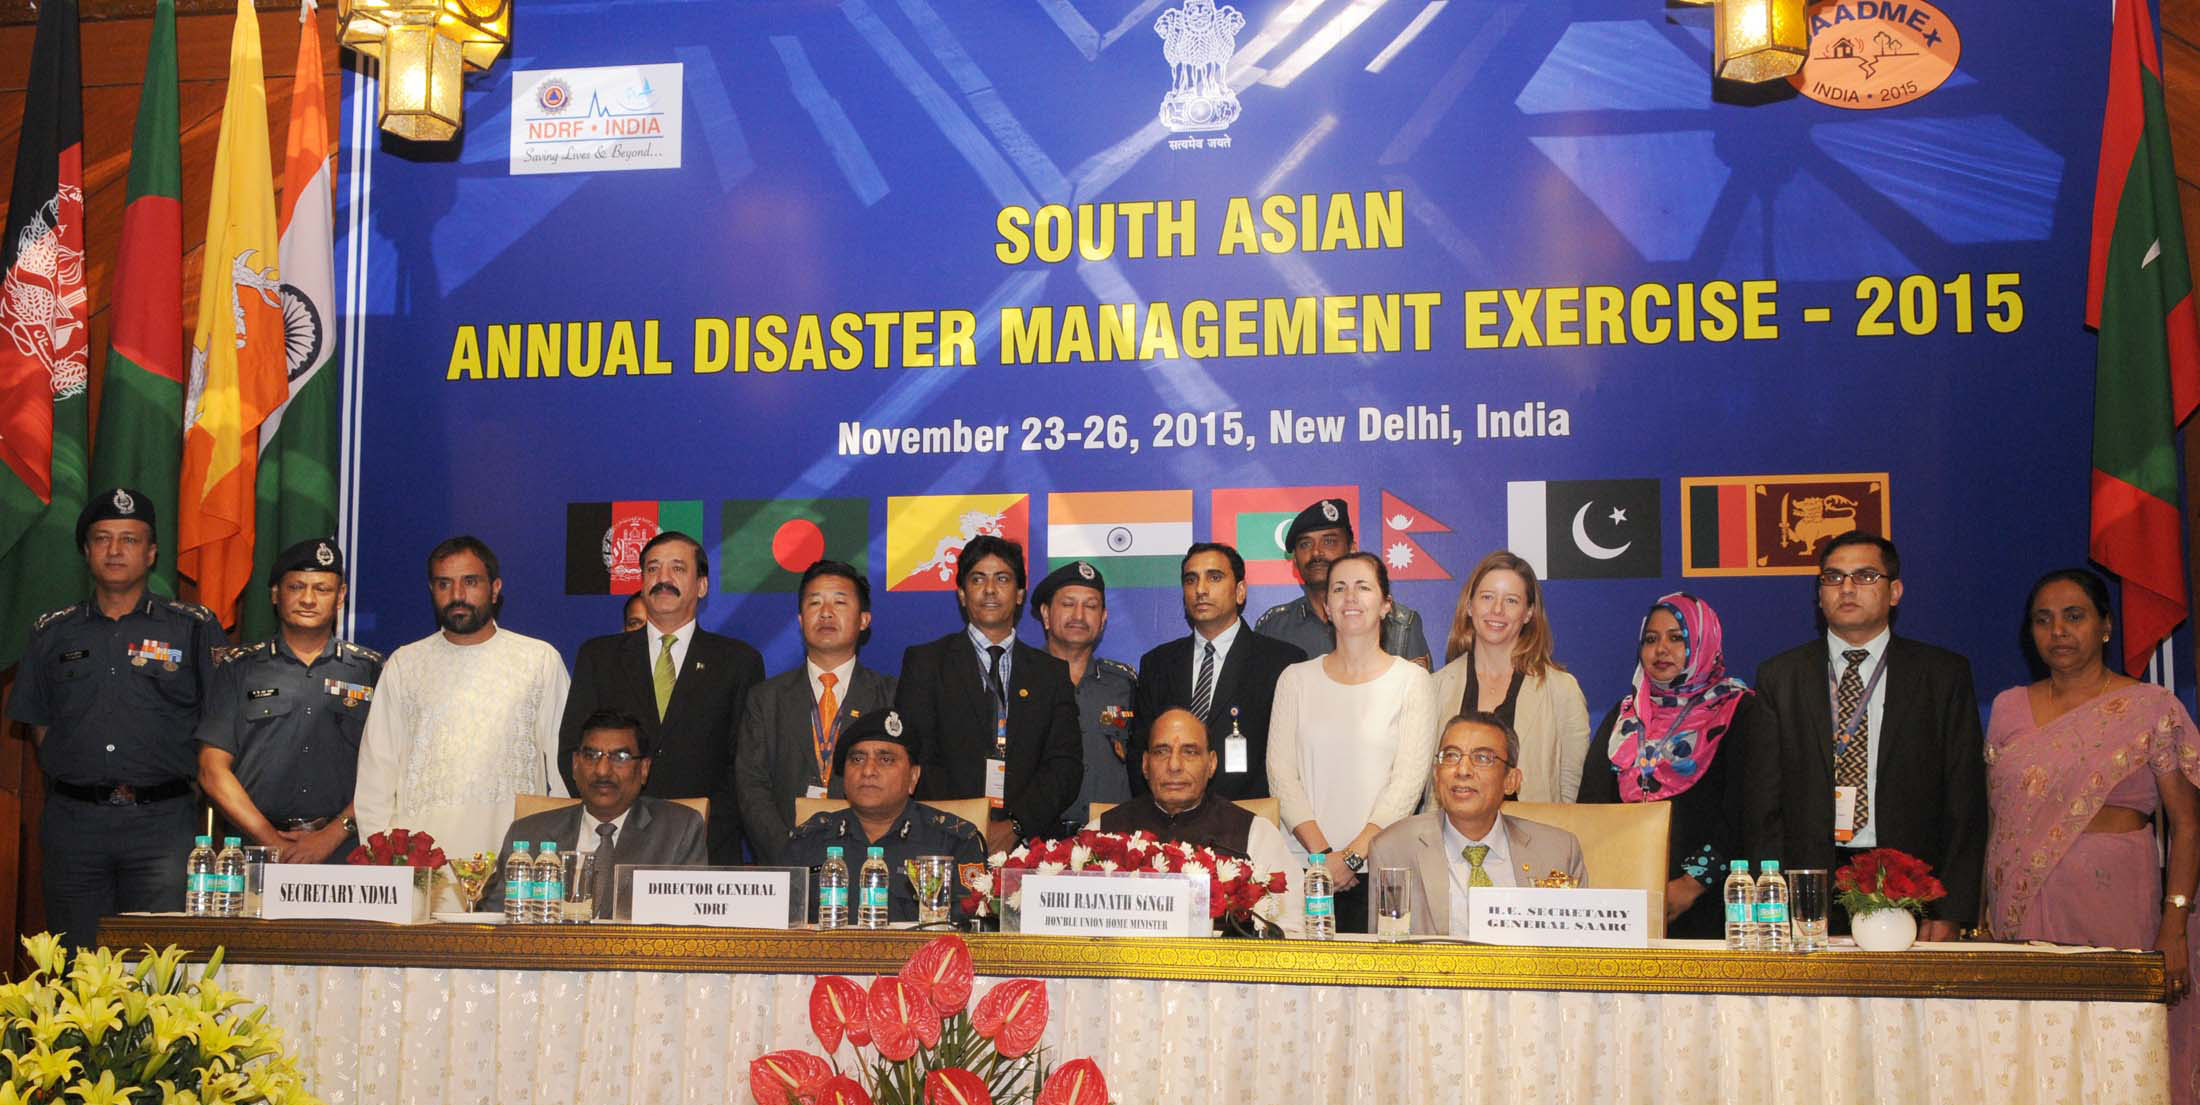 The Union Home Minister, Shri Rajnath Singh with the medal winner officers of NDRF, at the concluding session of the first South Asia Annual Disaster Management Exercise (SAADMEx)-2015, in New Delhi on November 26, 2015. The Secretary General, SAARC, Shri Arjun Bahadur Thapa, the Member Secretary, NDMA, Shri R.K. Jain and the Director General, National Disaster Response Force (NDRF), Shri O.P. Singh are also seen.